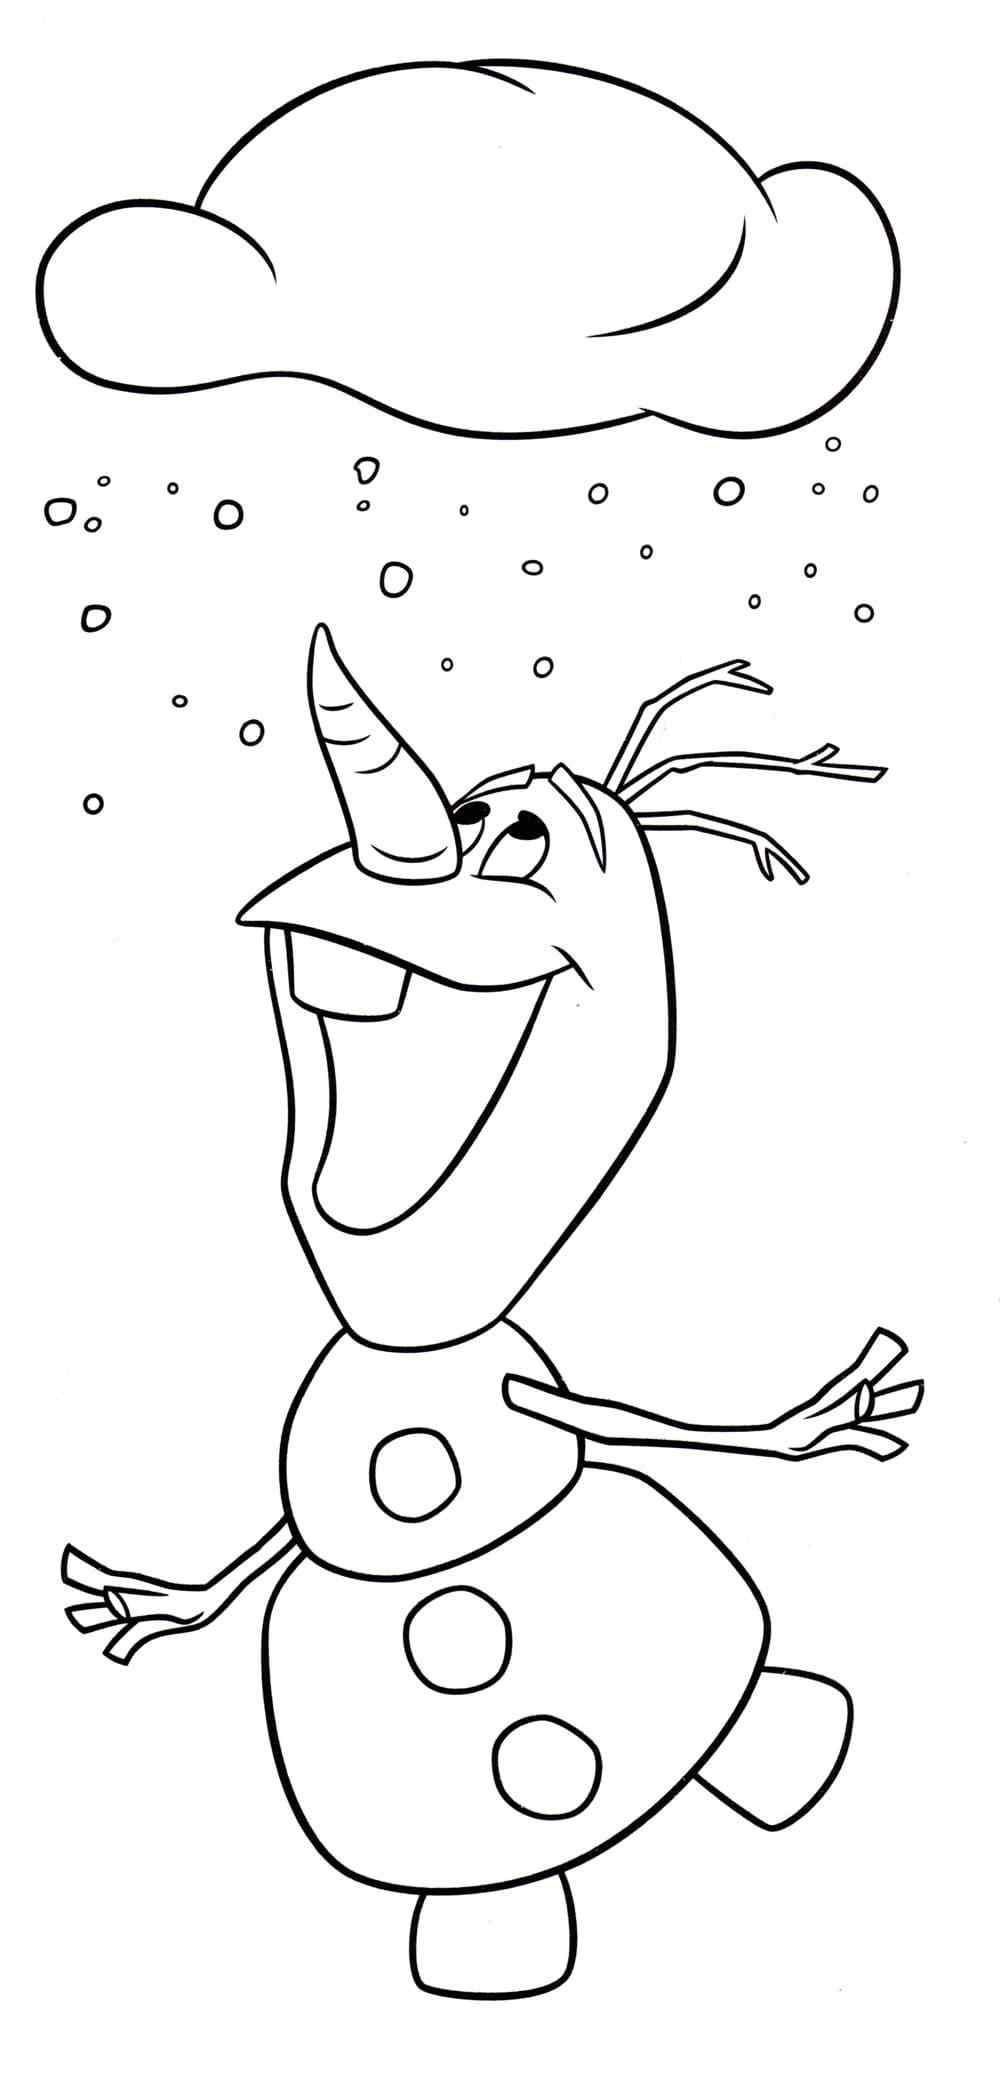 Olaf Enjoys The First Snow In Christmas Coloring Page